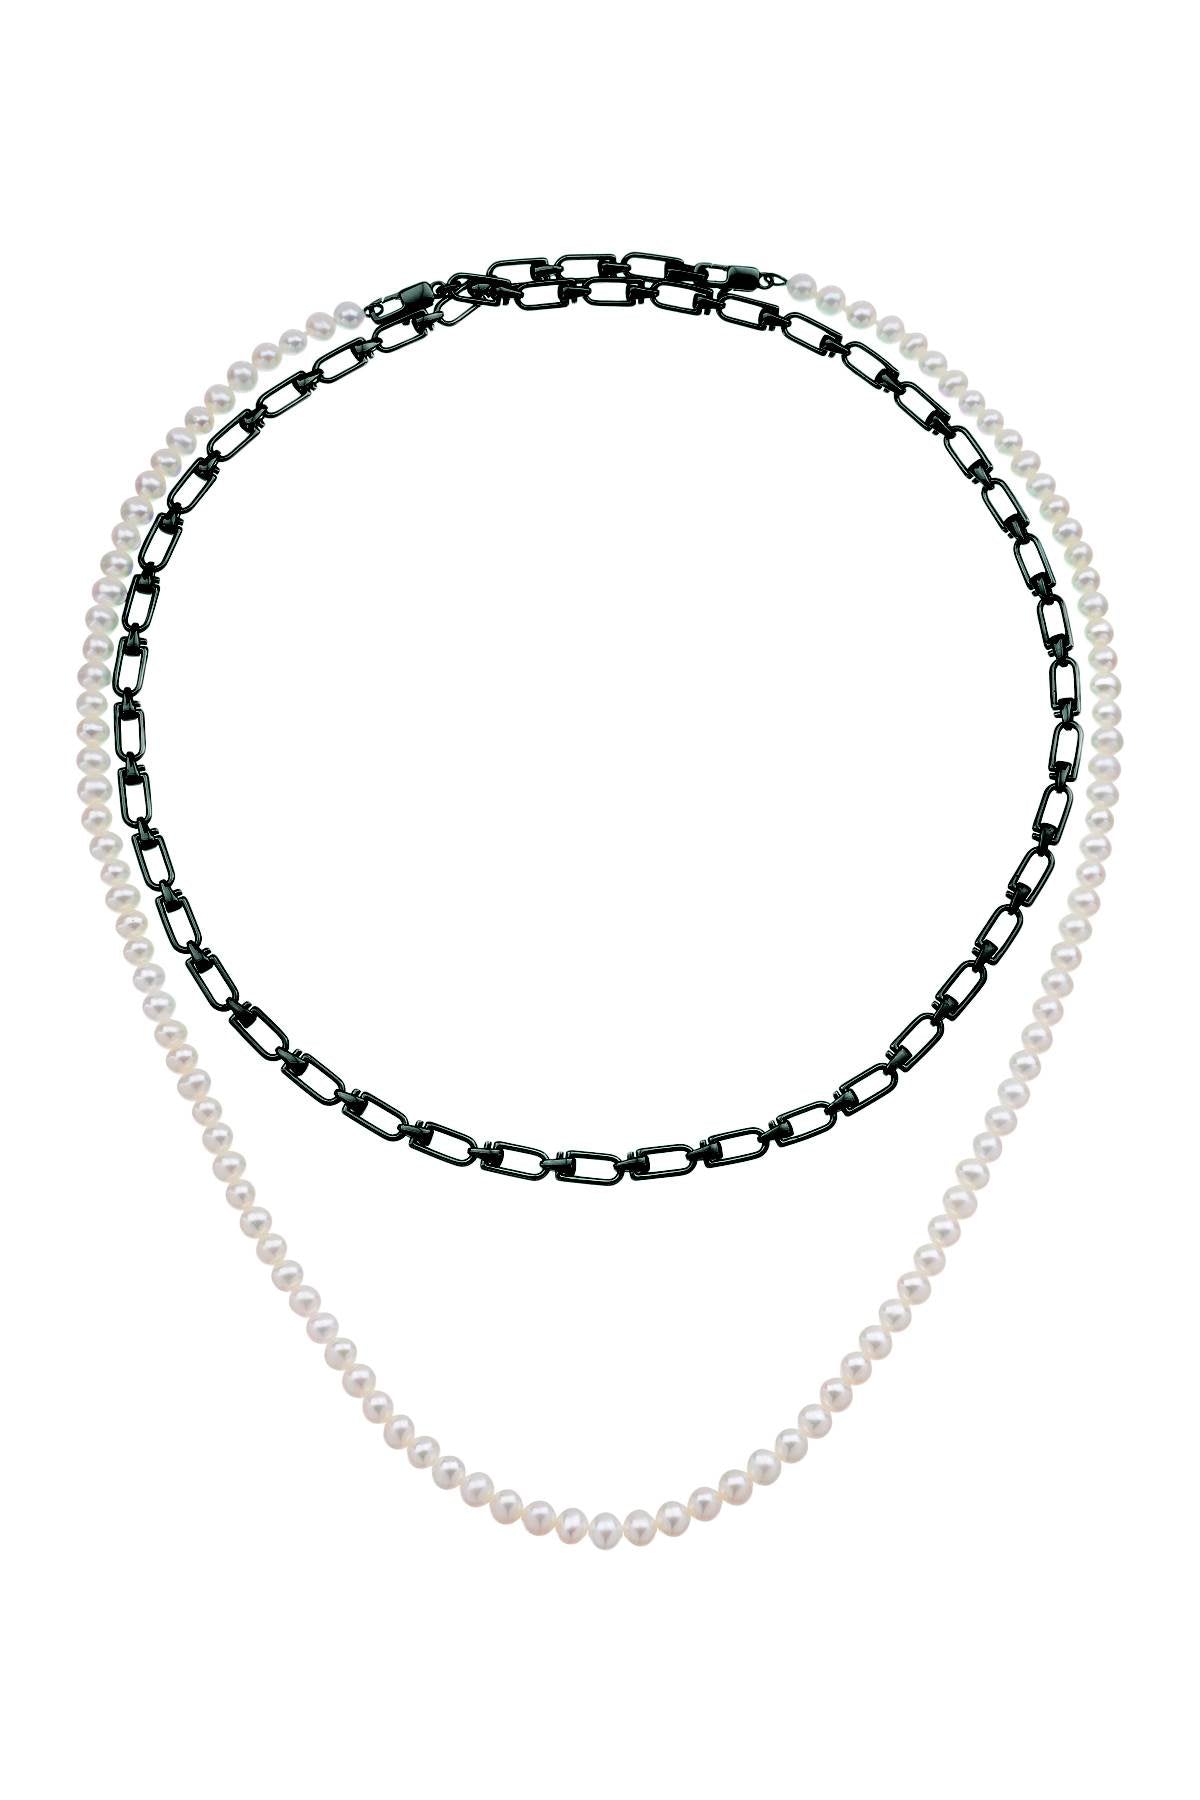 Eera 'Reine' Double Necklace With Pearls   White